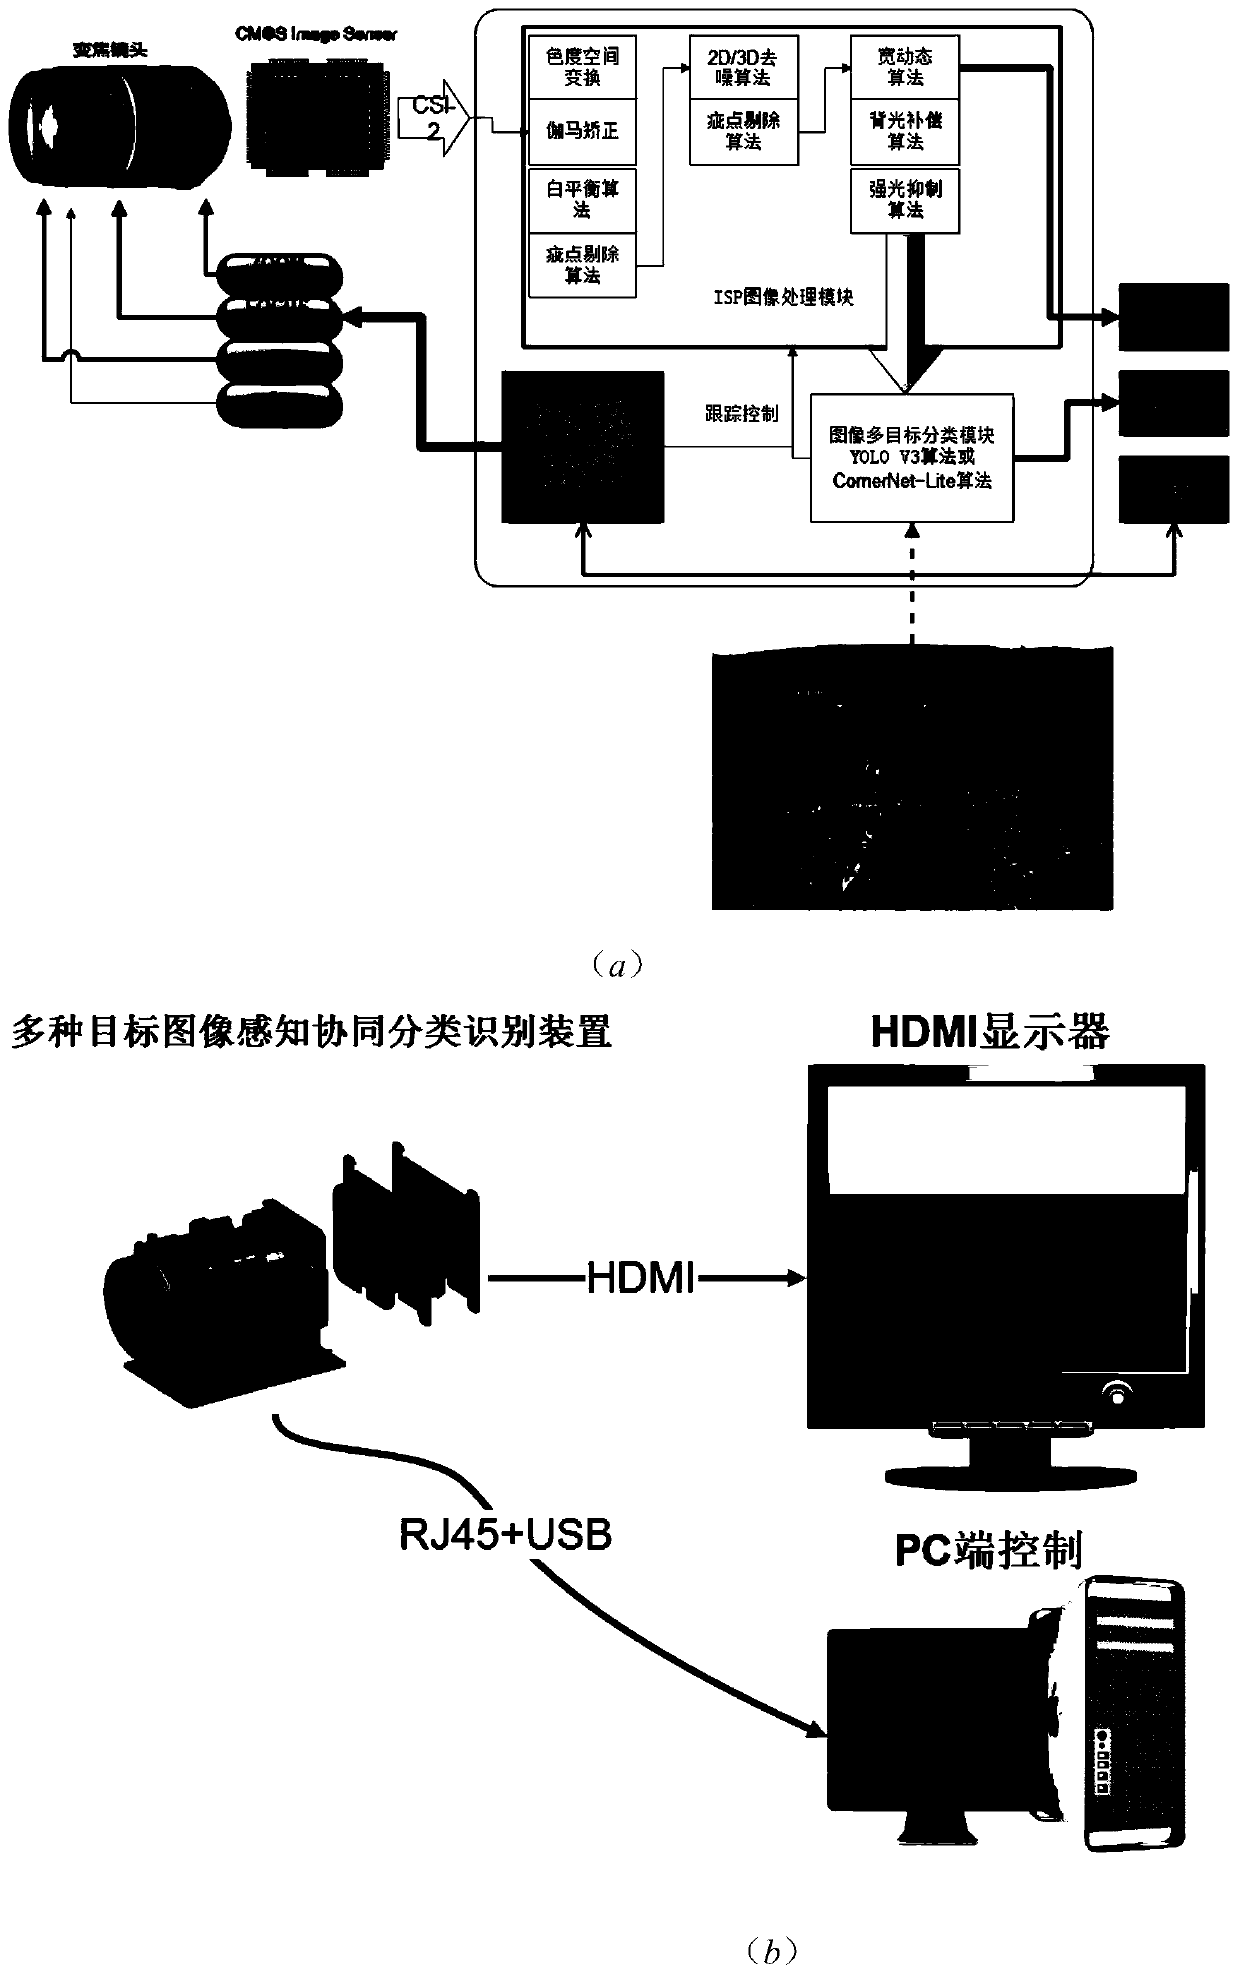 Multi-target intelligent imaging and recognition device and method